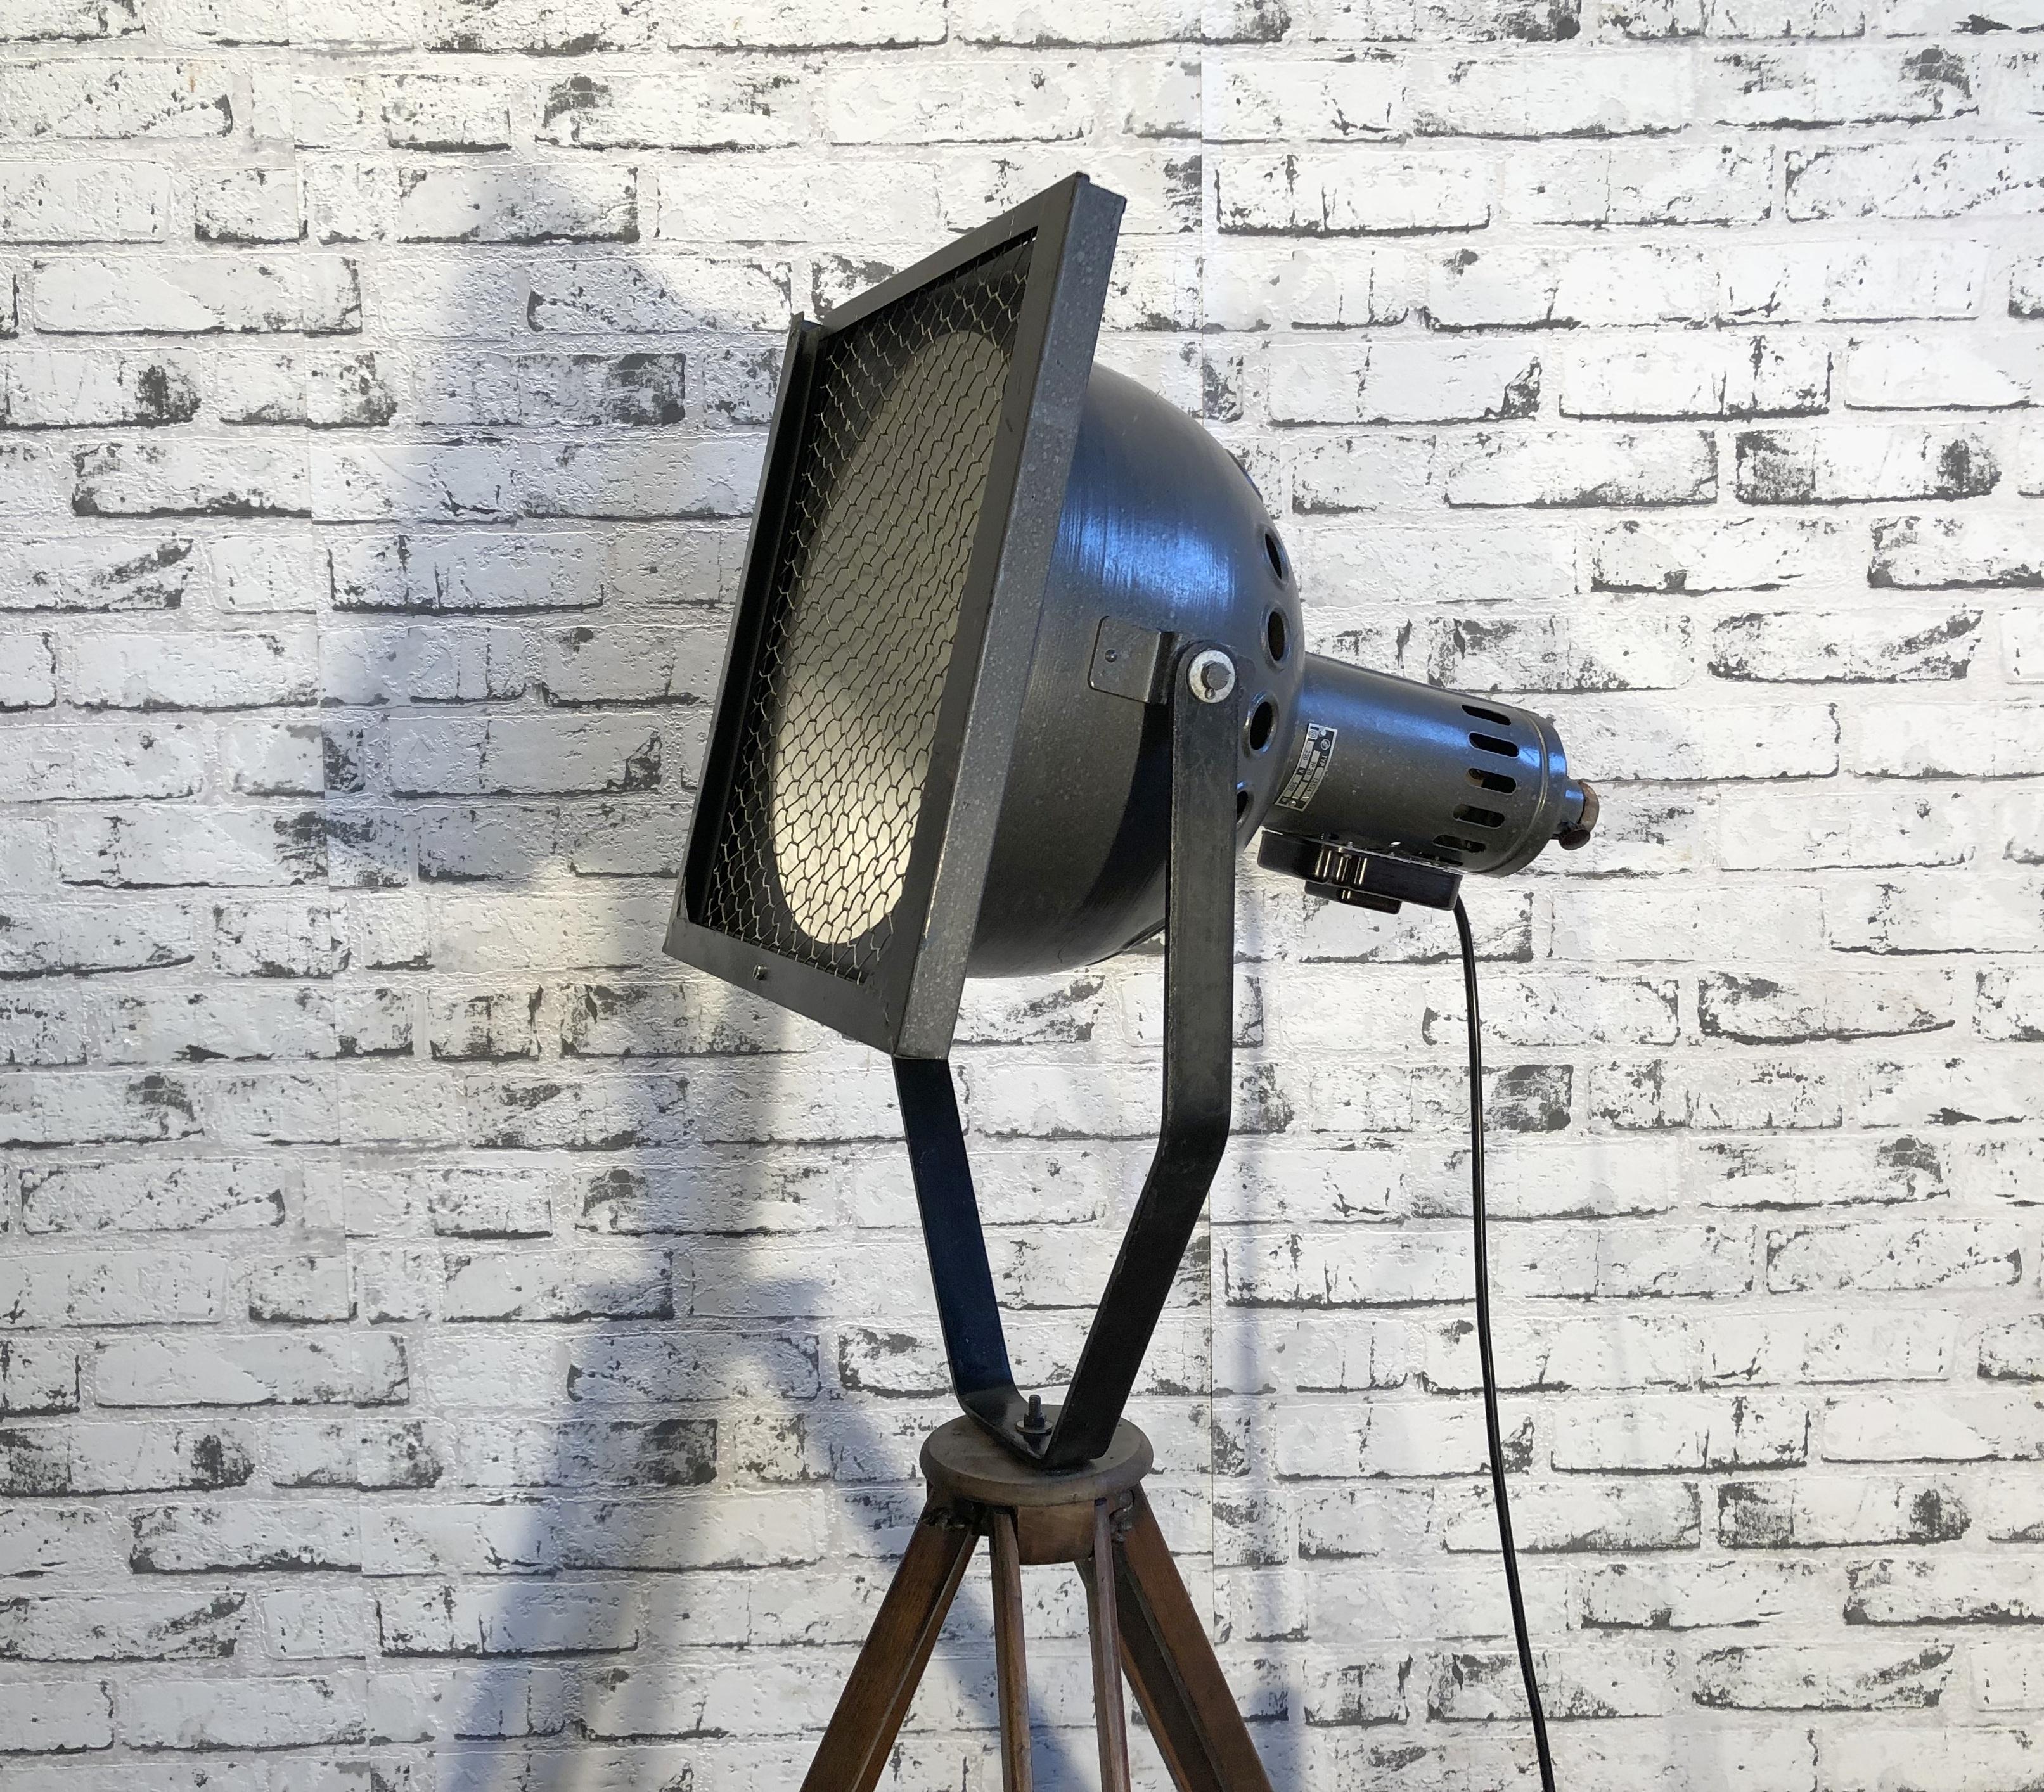 - Vintage Theatre spotlight on wooden tripod
- Adjustable height and angle
- Grey metal body , iron grid
- Dimensions of the lamp: 33 x 33 cm, Height: 55 cm, Depth: 40 cm
- Minimum total height: 160 cm
- Maximum total height: 210 cm
- New